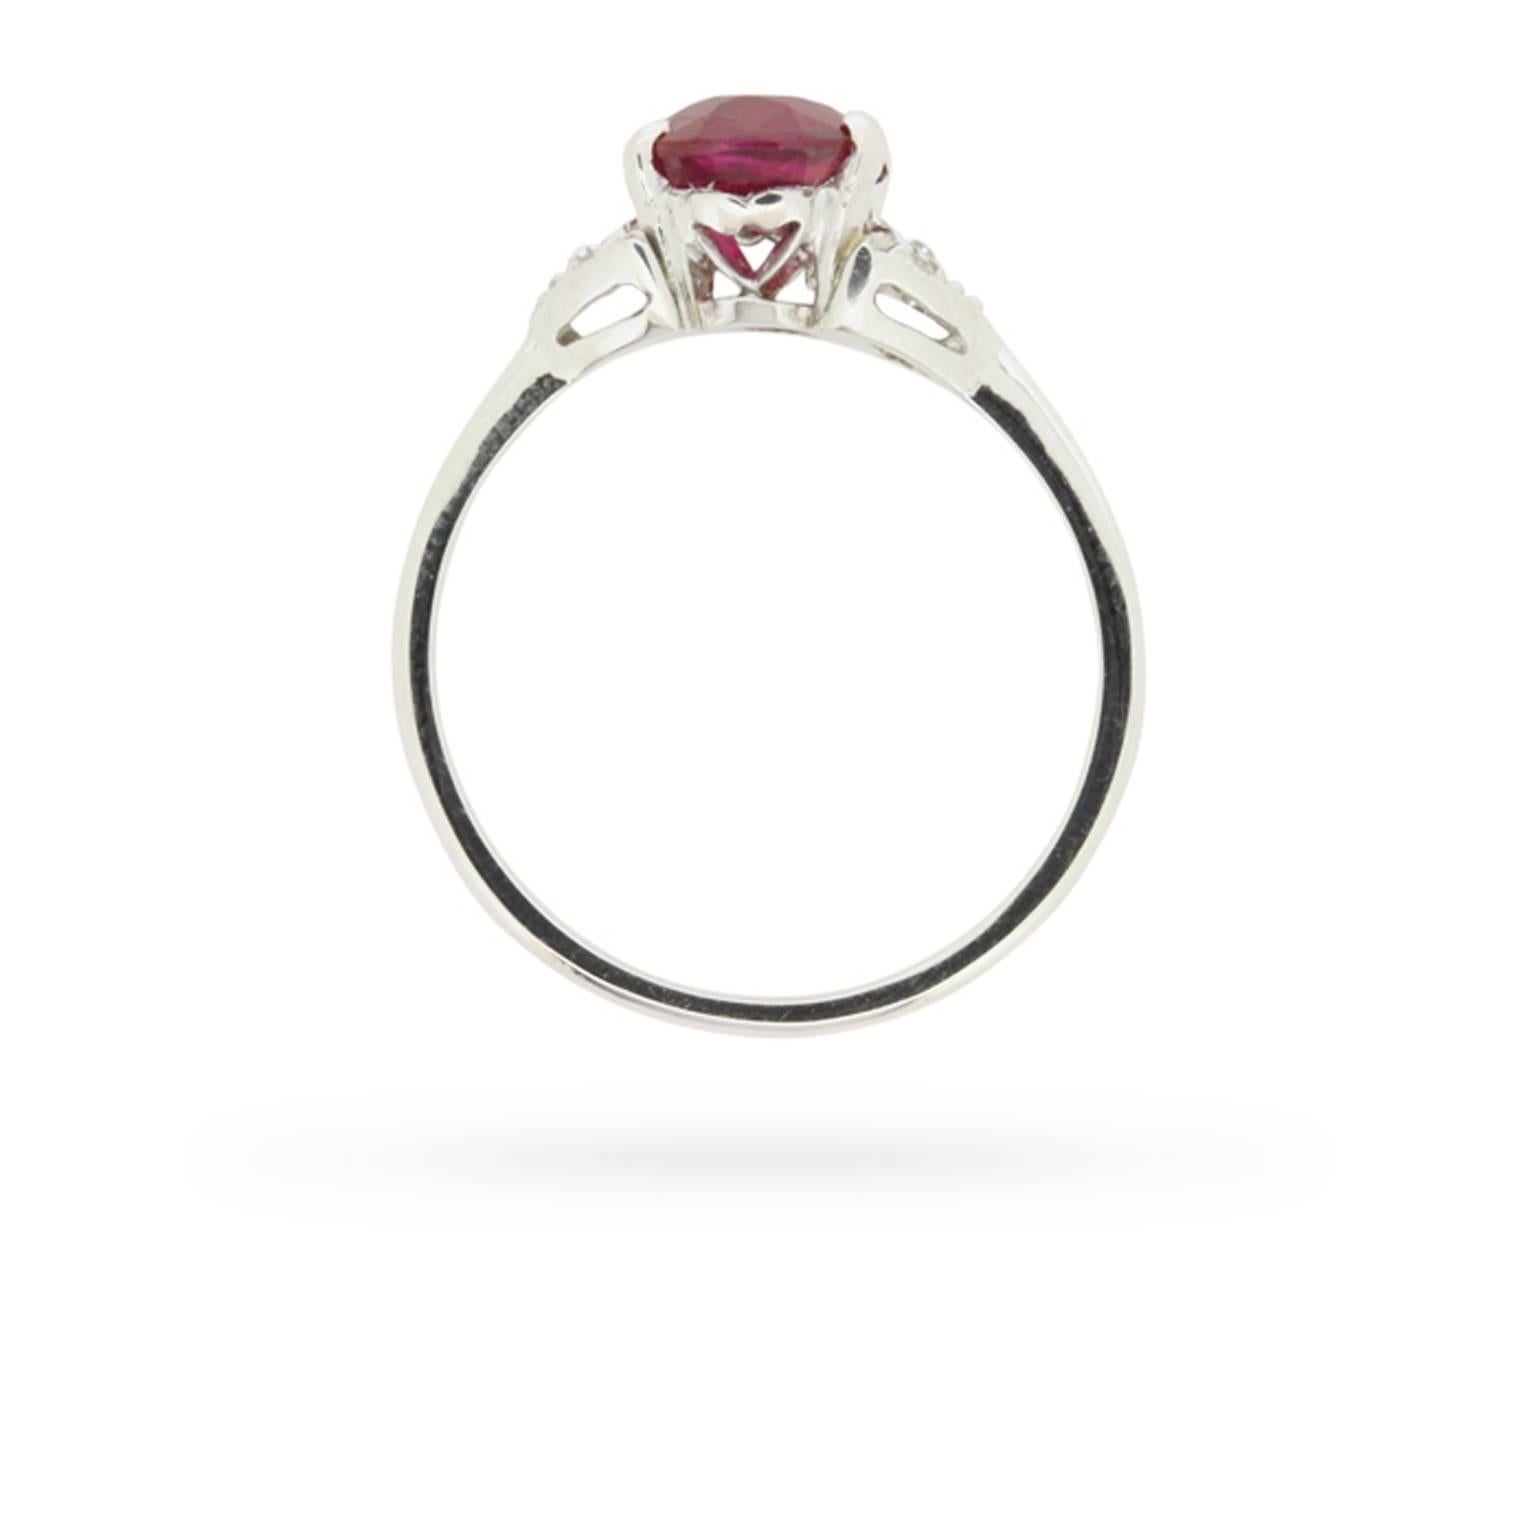 A ripe, red, GIA certified, oval-shaped ruby is the star of this original 1930s era platinum, ruby, and diamond ring.

The stunning 2.03 carat stone is resplendent in four curving claws set within a handmade gallery between a sparkling trefoil